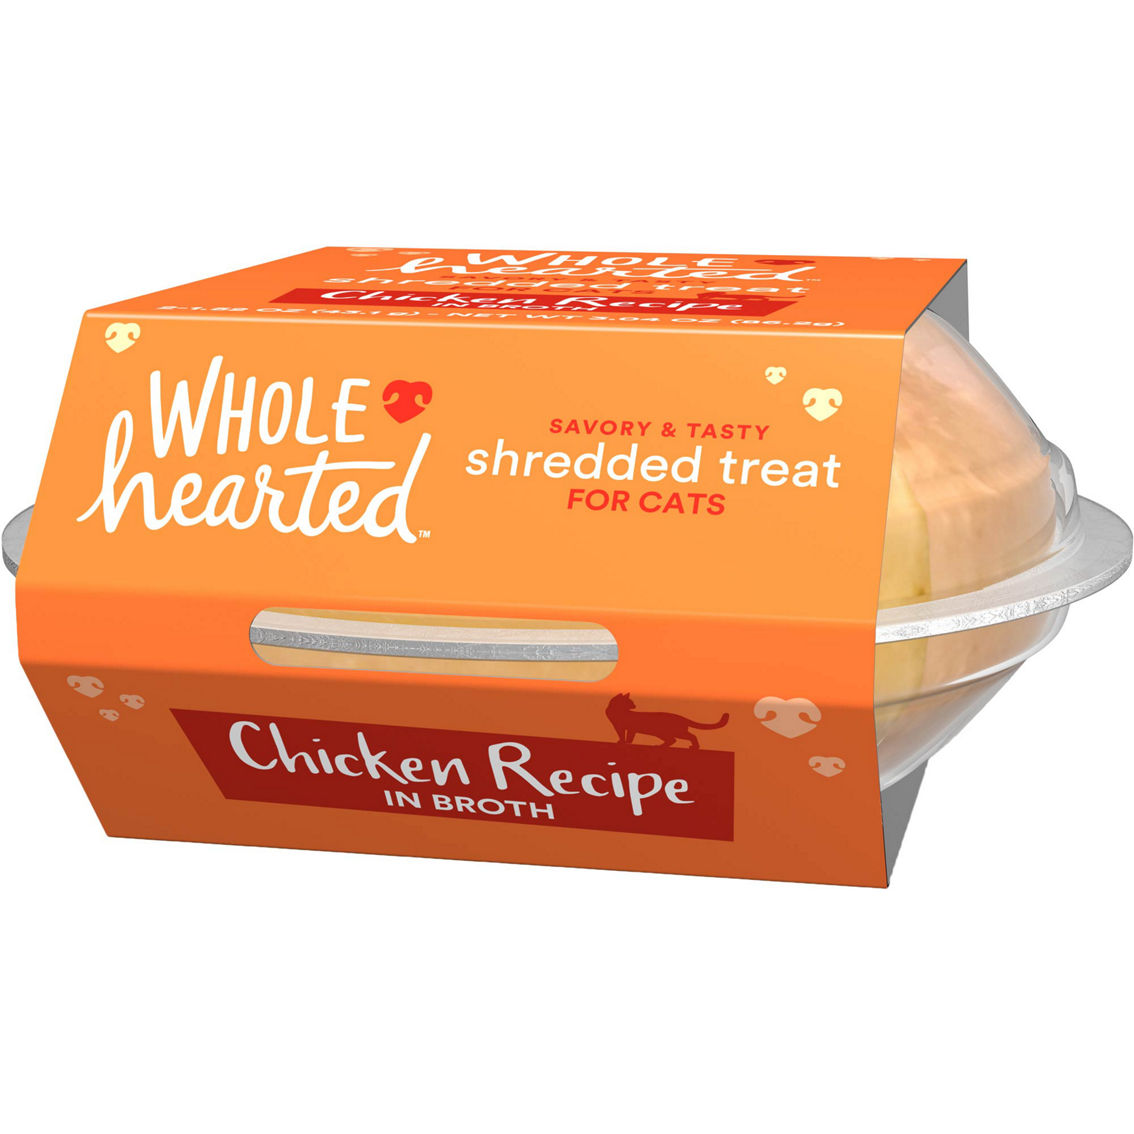 WholeHearted Grain Free Chicken Recipe Shredded Cat Treats 2 ct., 1.52 oz. - Image 3 of 8